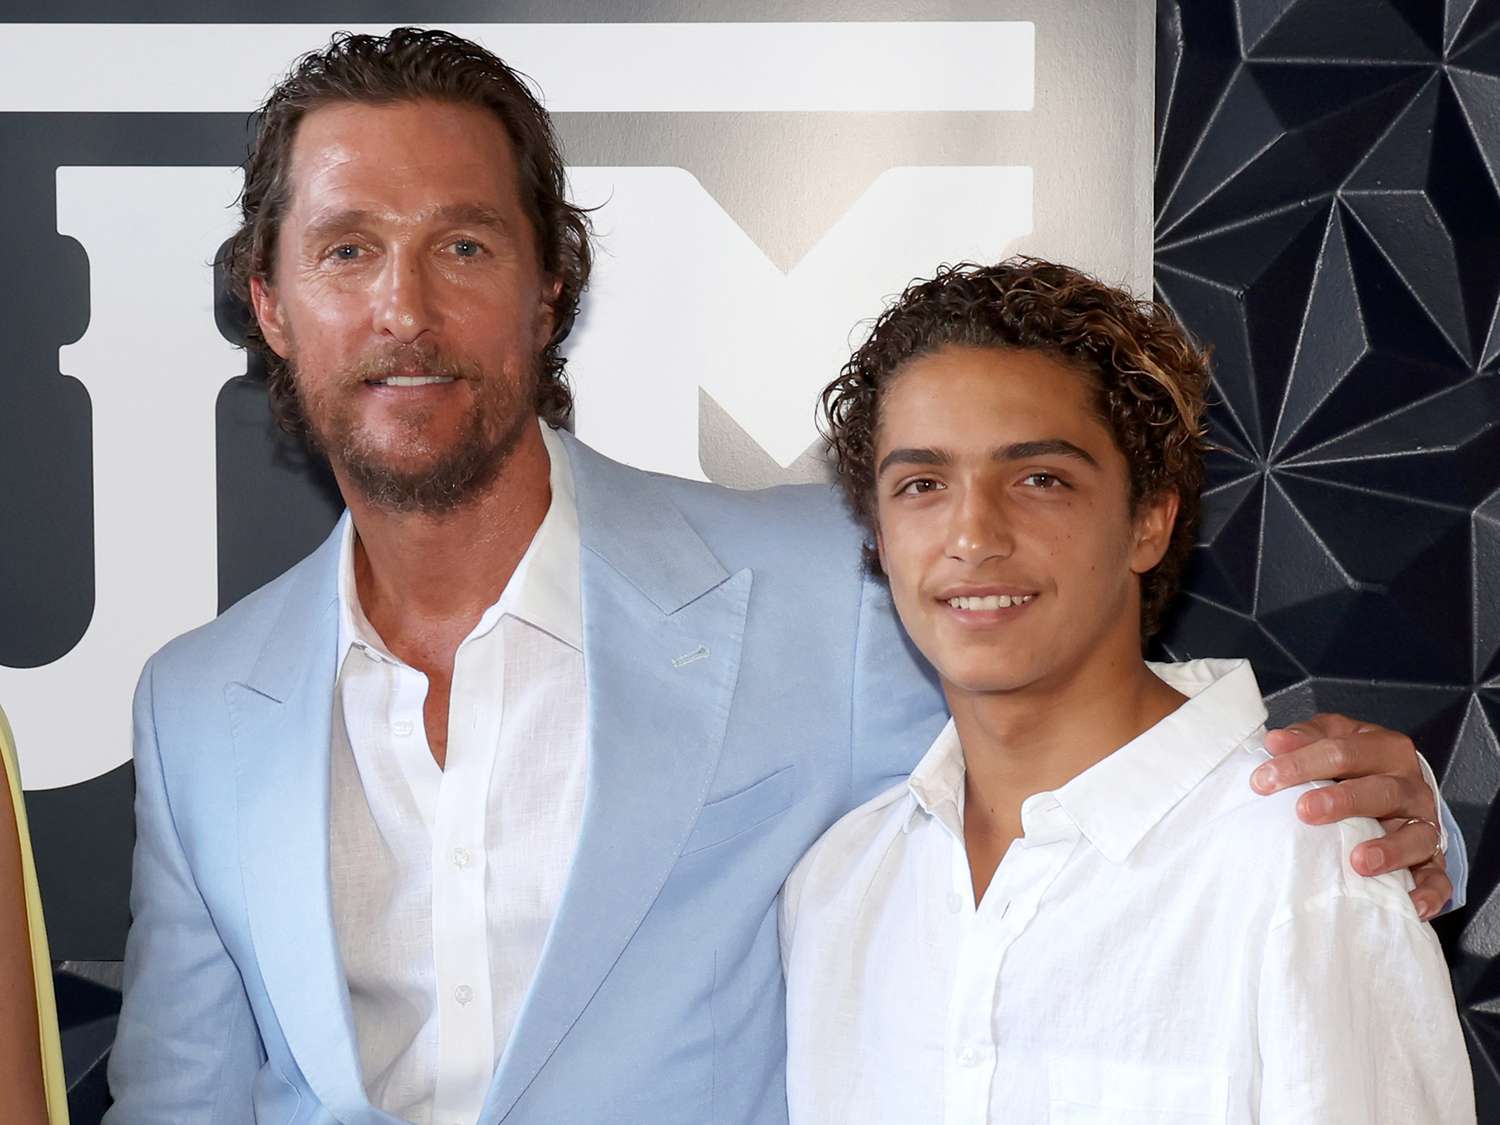 Why Hollywood Star Matthew McConaughey Swears Off Deodorant for Over Two Decades